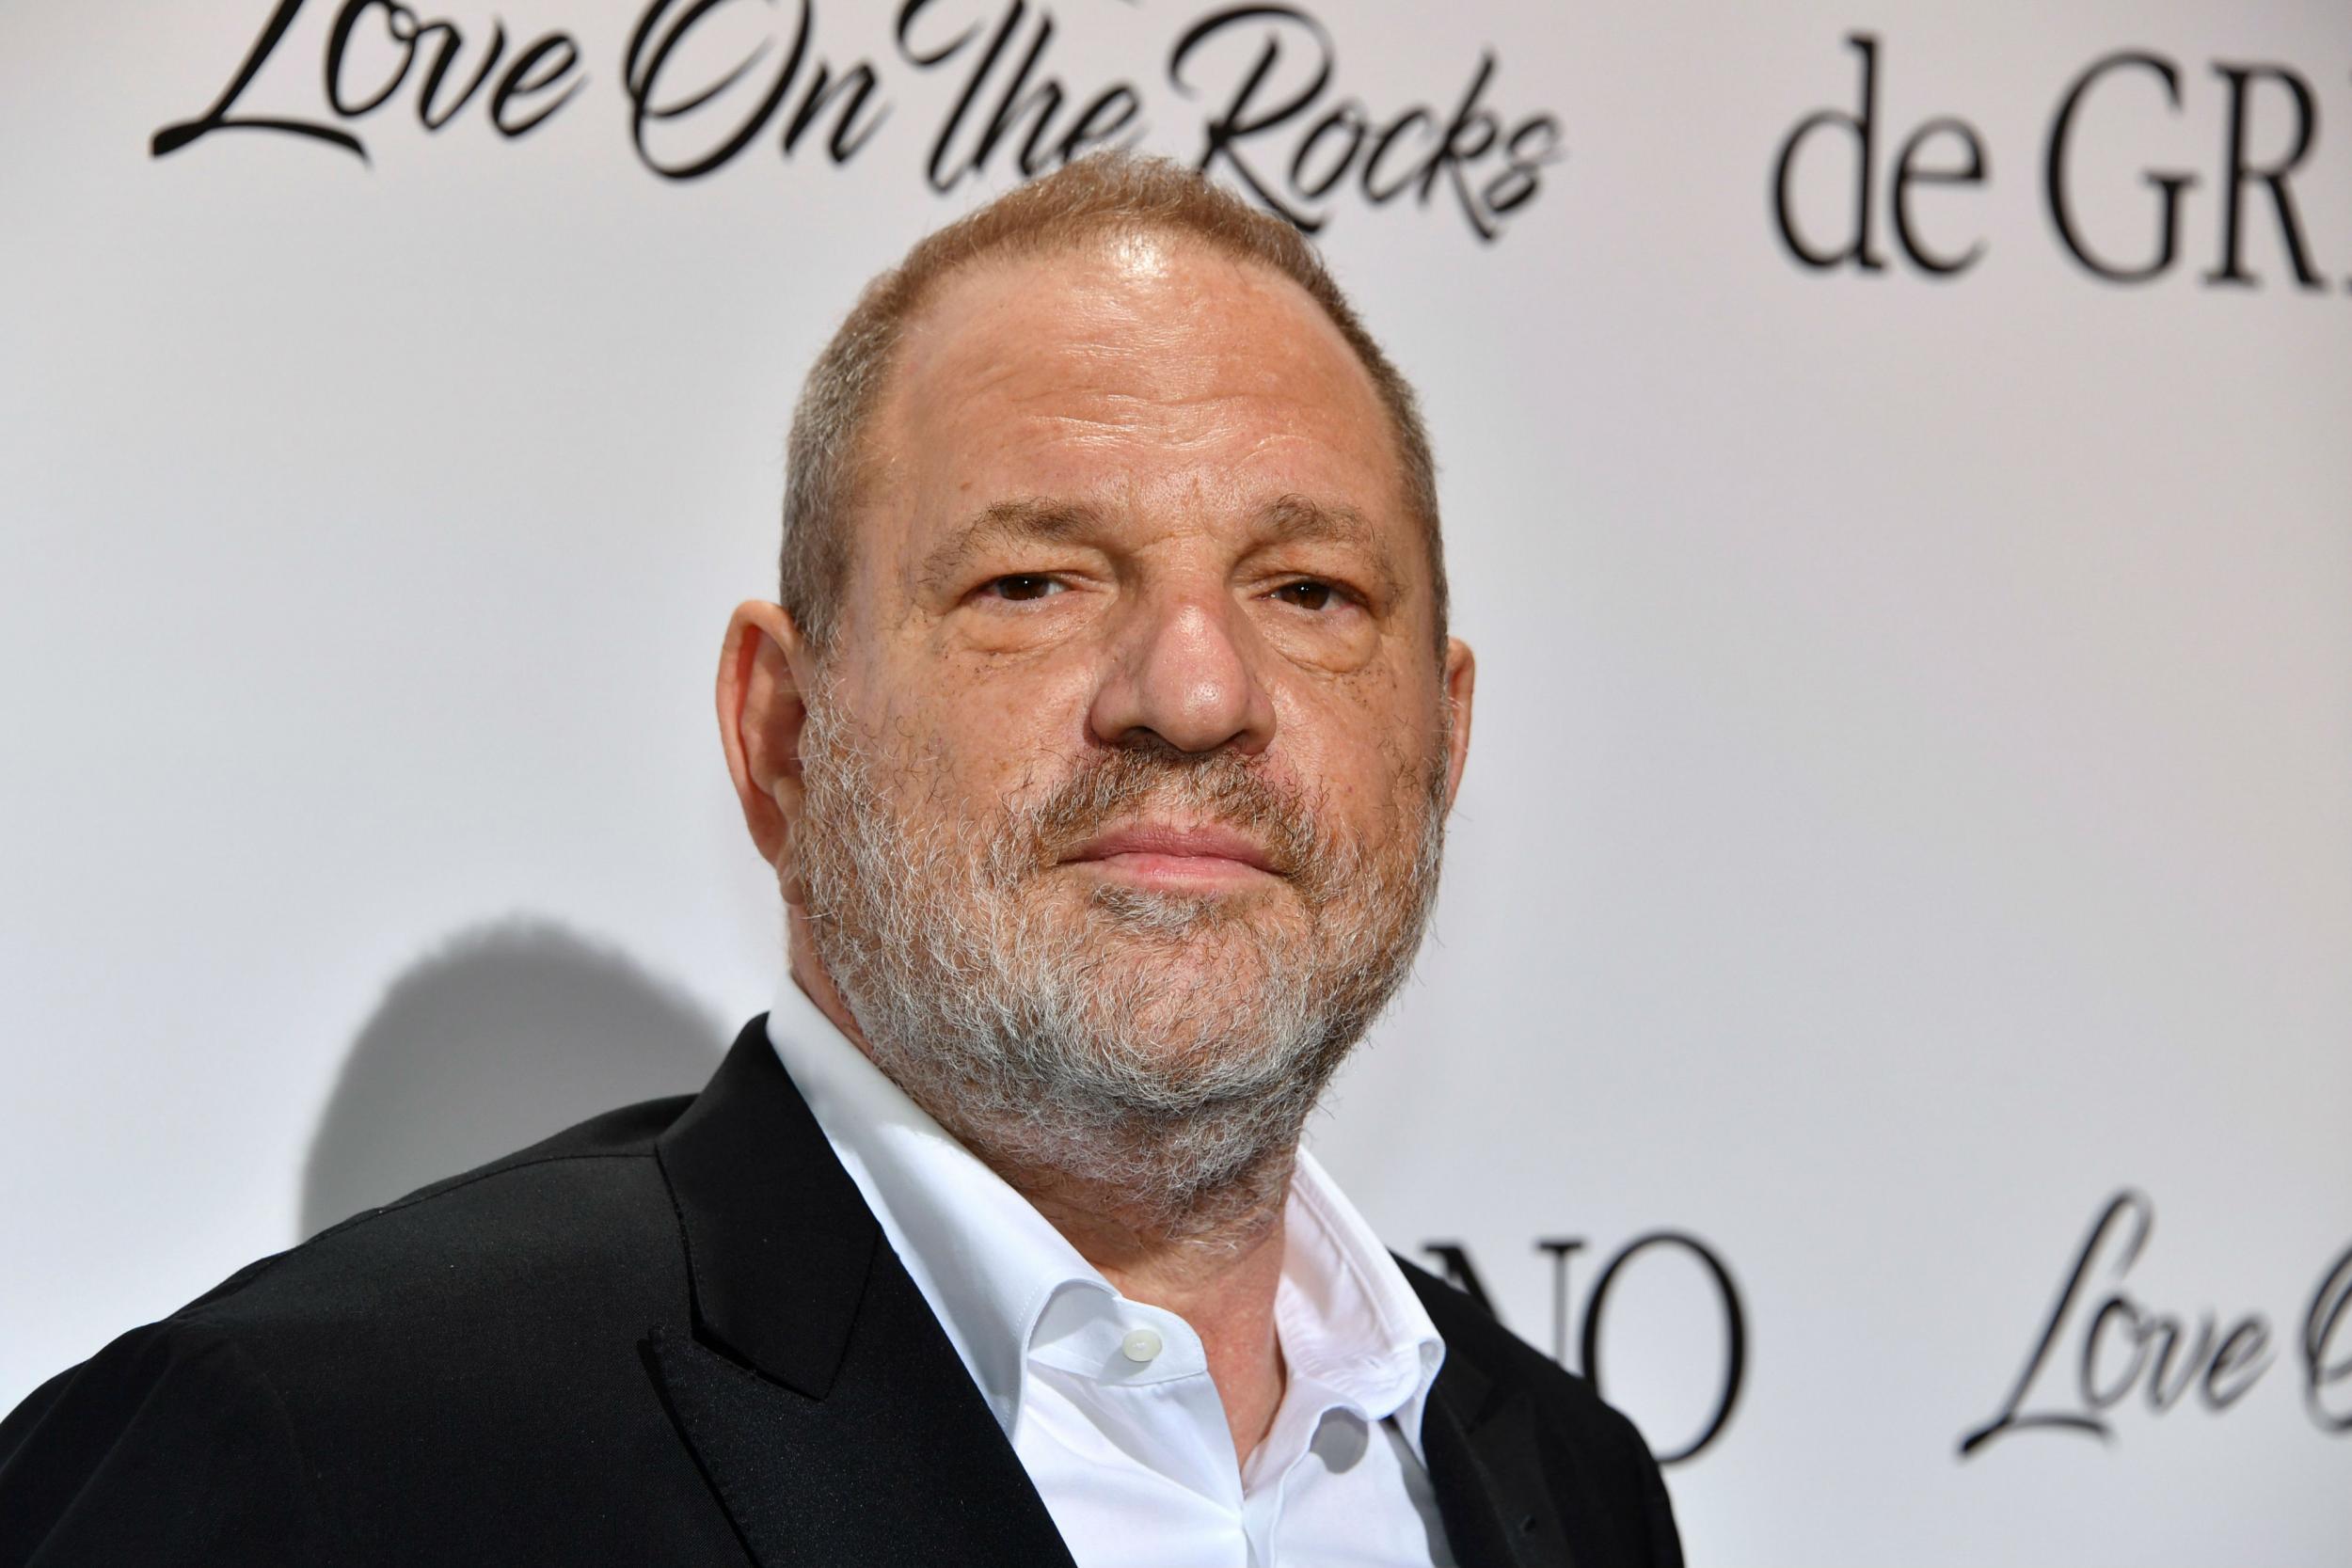 Mr Weinstein faces a number of allegations against him